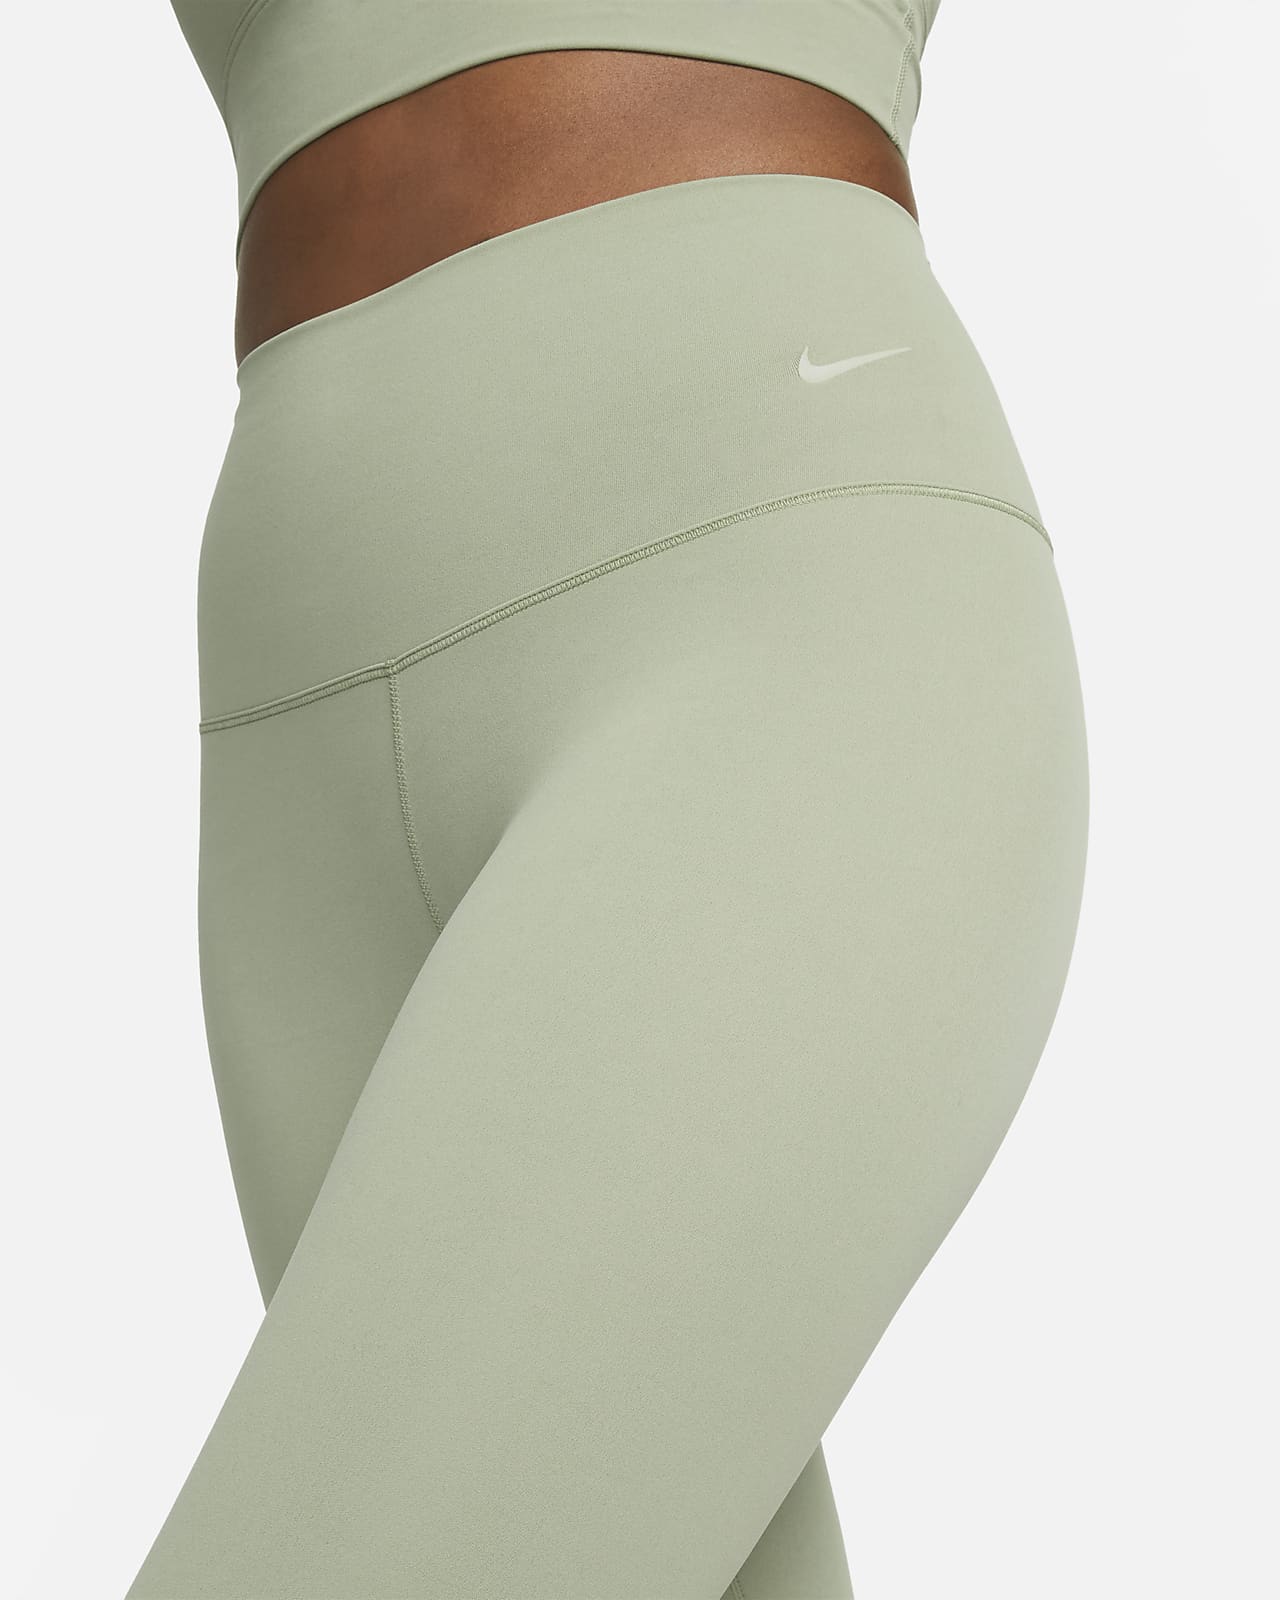 Nike Cropped Running Tights Black - $25 - From Kaleigh